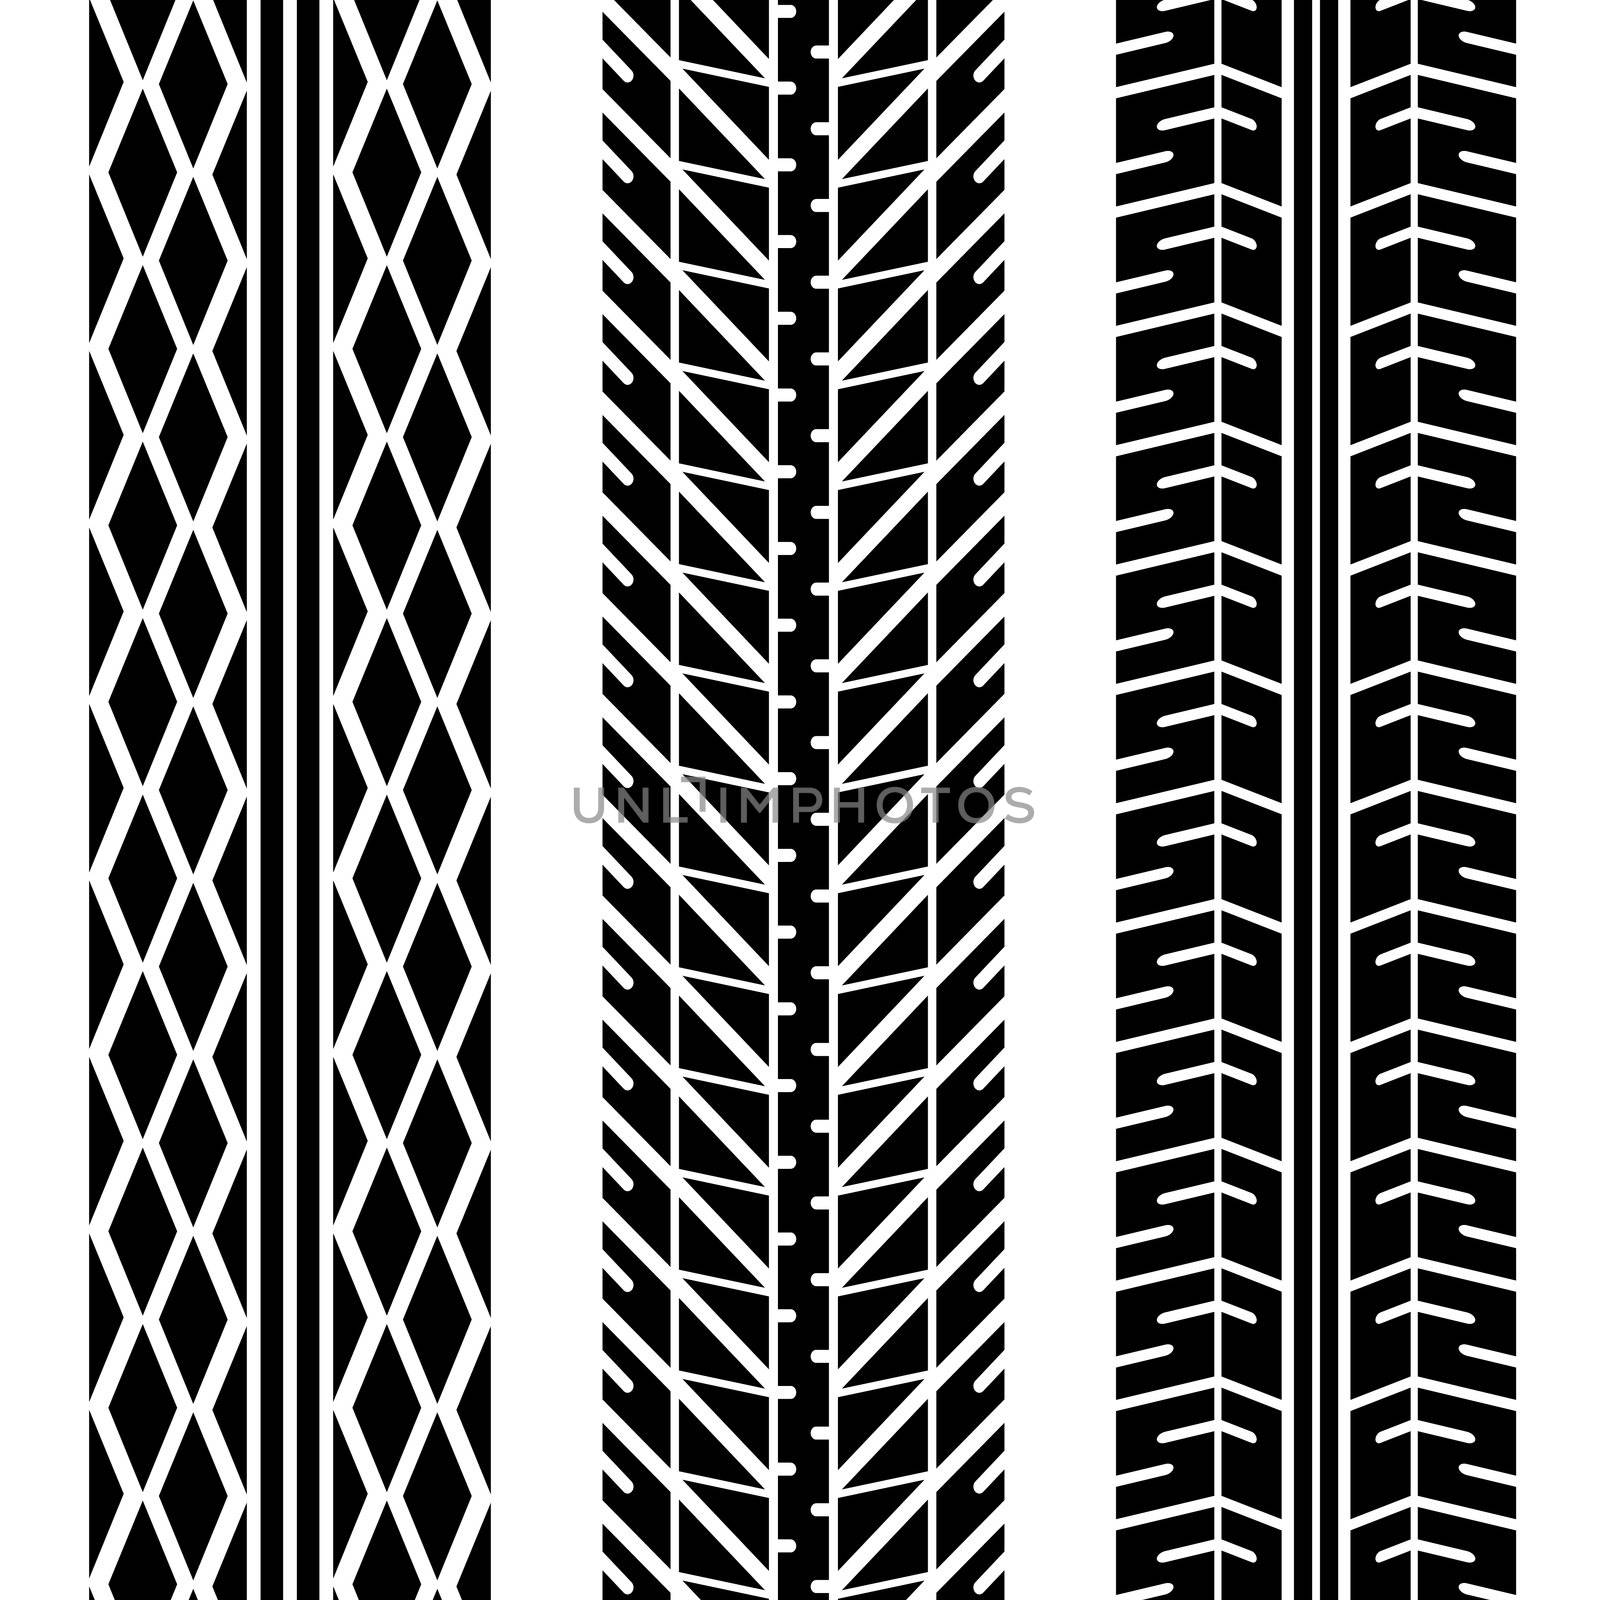 Three different tire tread patterns in black and white